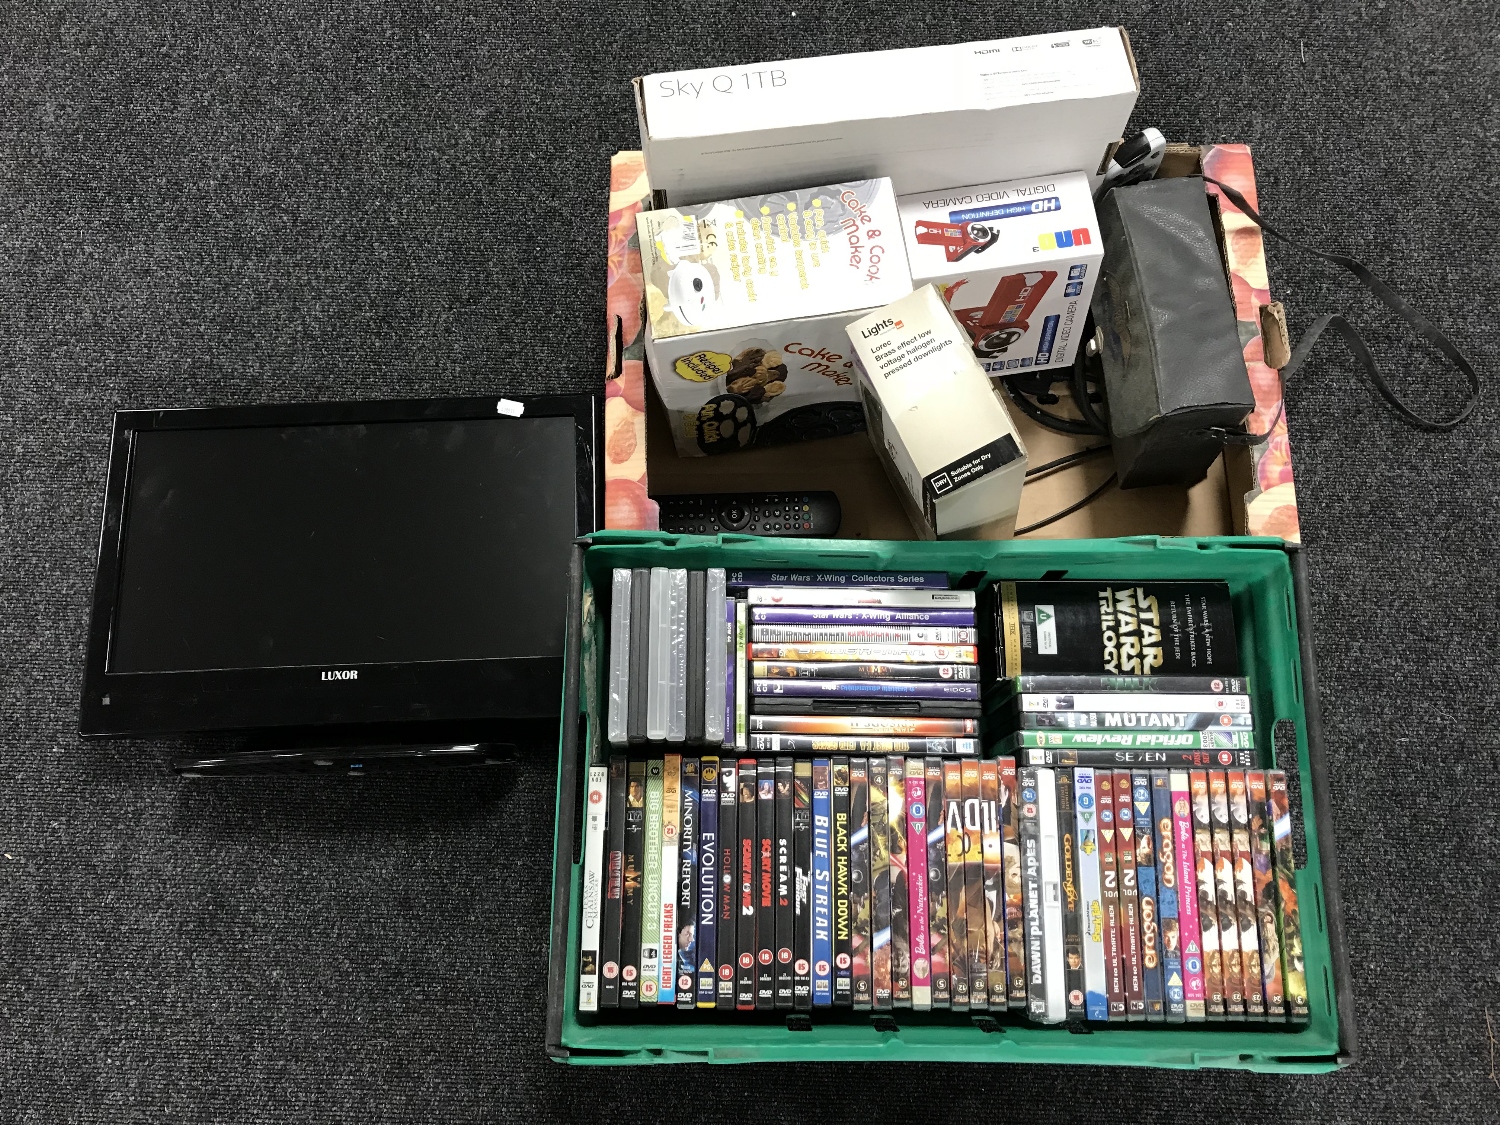 A box of assorted DVDs and CDs, box of Sky box, digital camera,